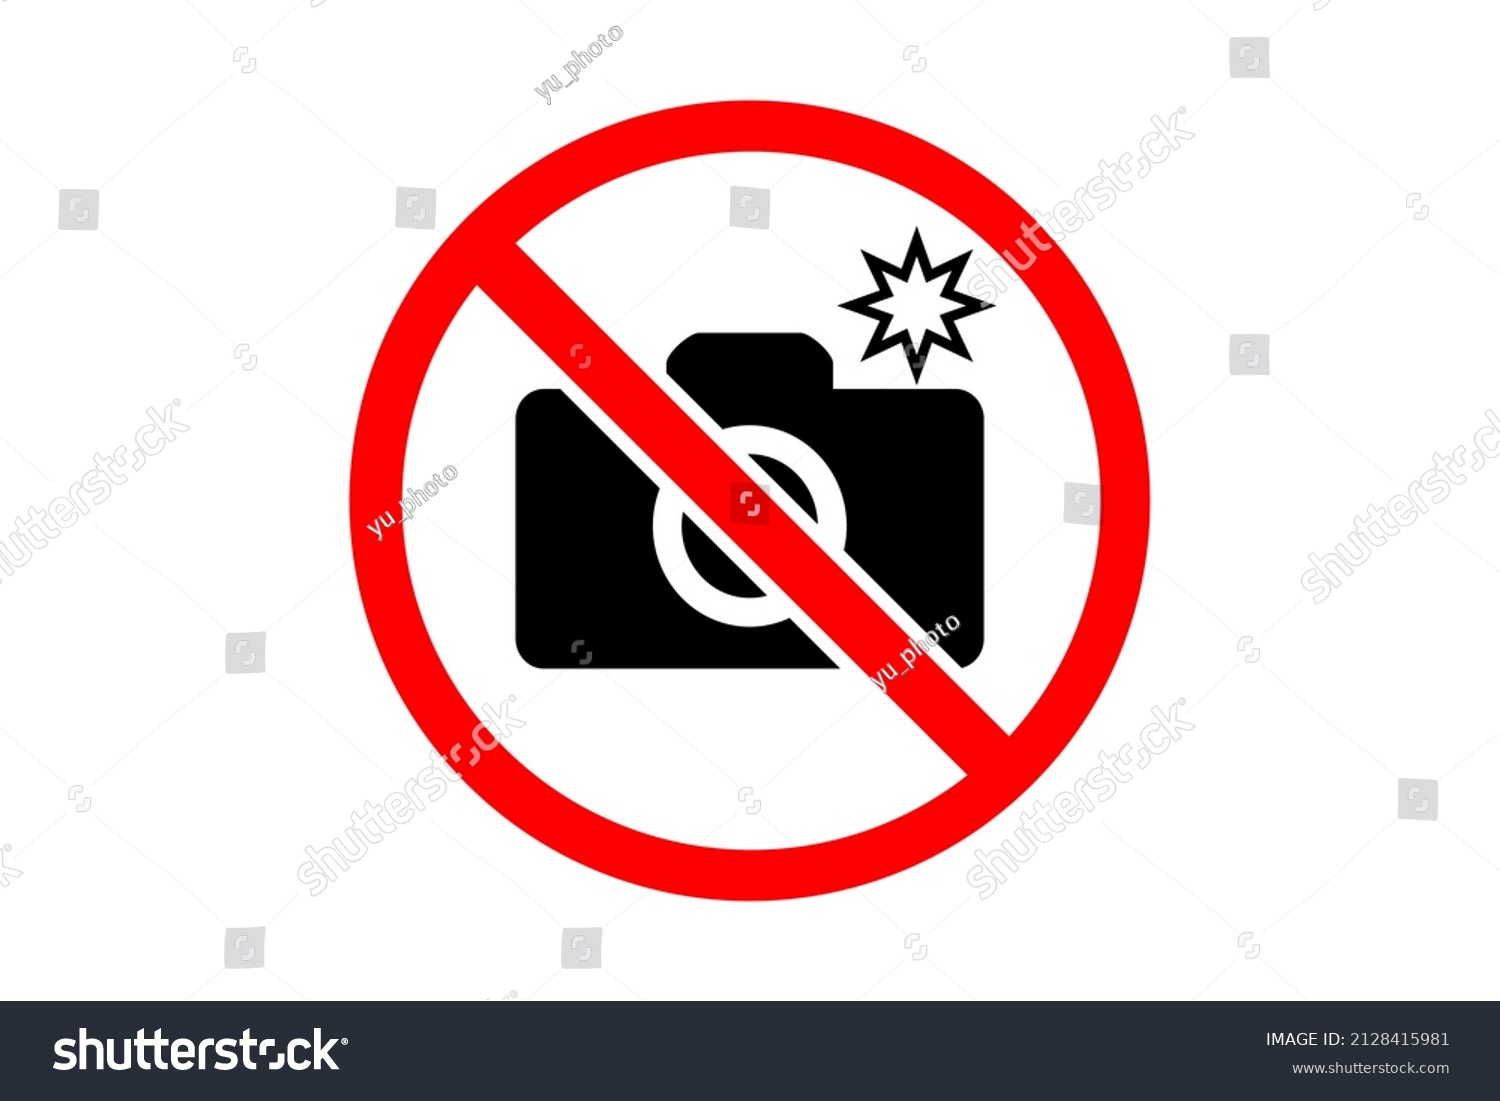 stock-photo-flash-shooting-prohibited-icon-with-camera-2128415981.jpg